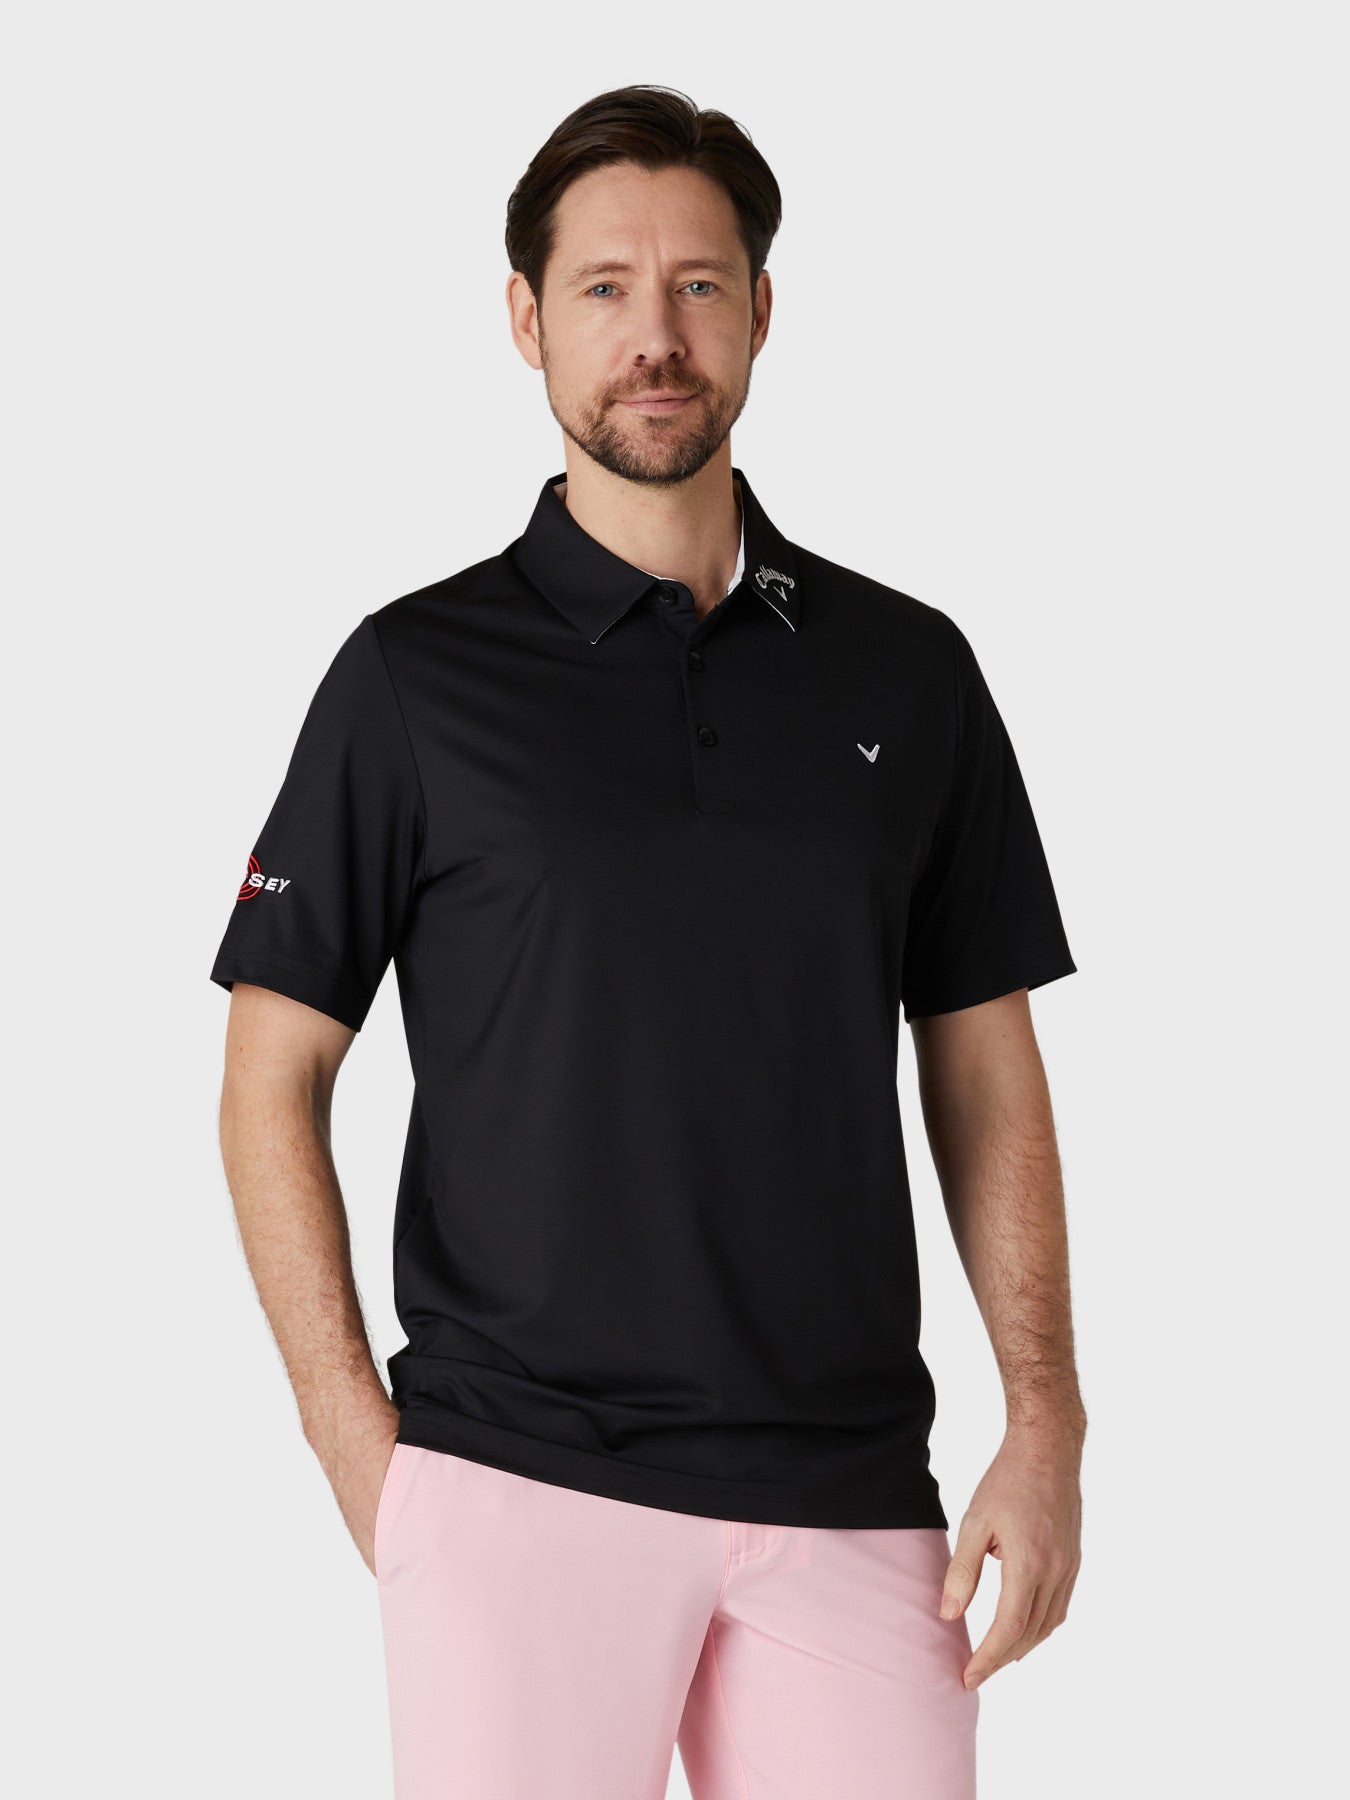 View Short Sleeve Odyssey Block Polo Shirt In Caviar information